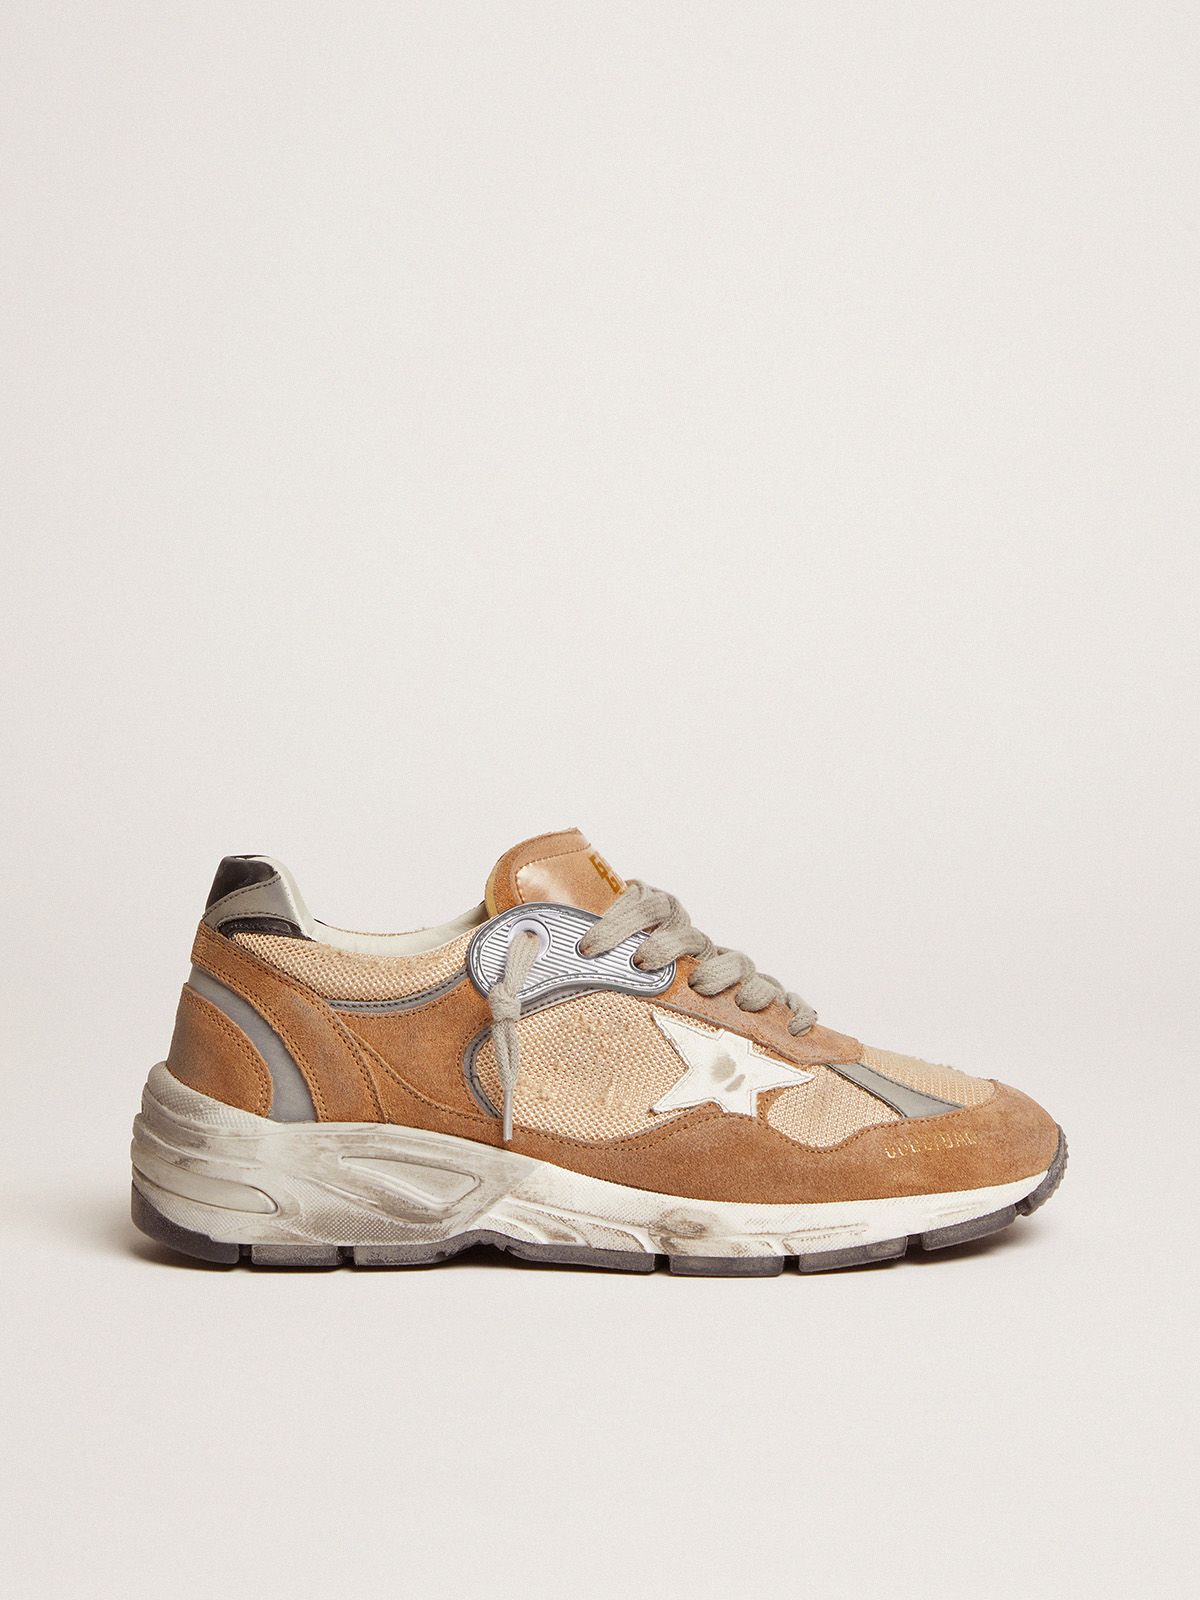 golden goose tobacco-colored sneakers mesh heel white and black Dad-Star tab in leather with star suede